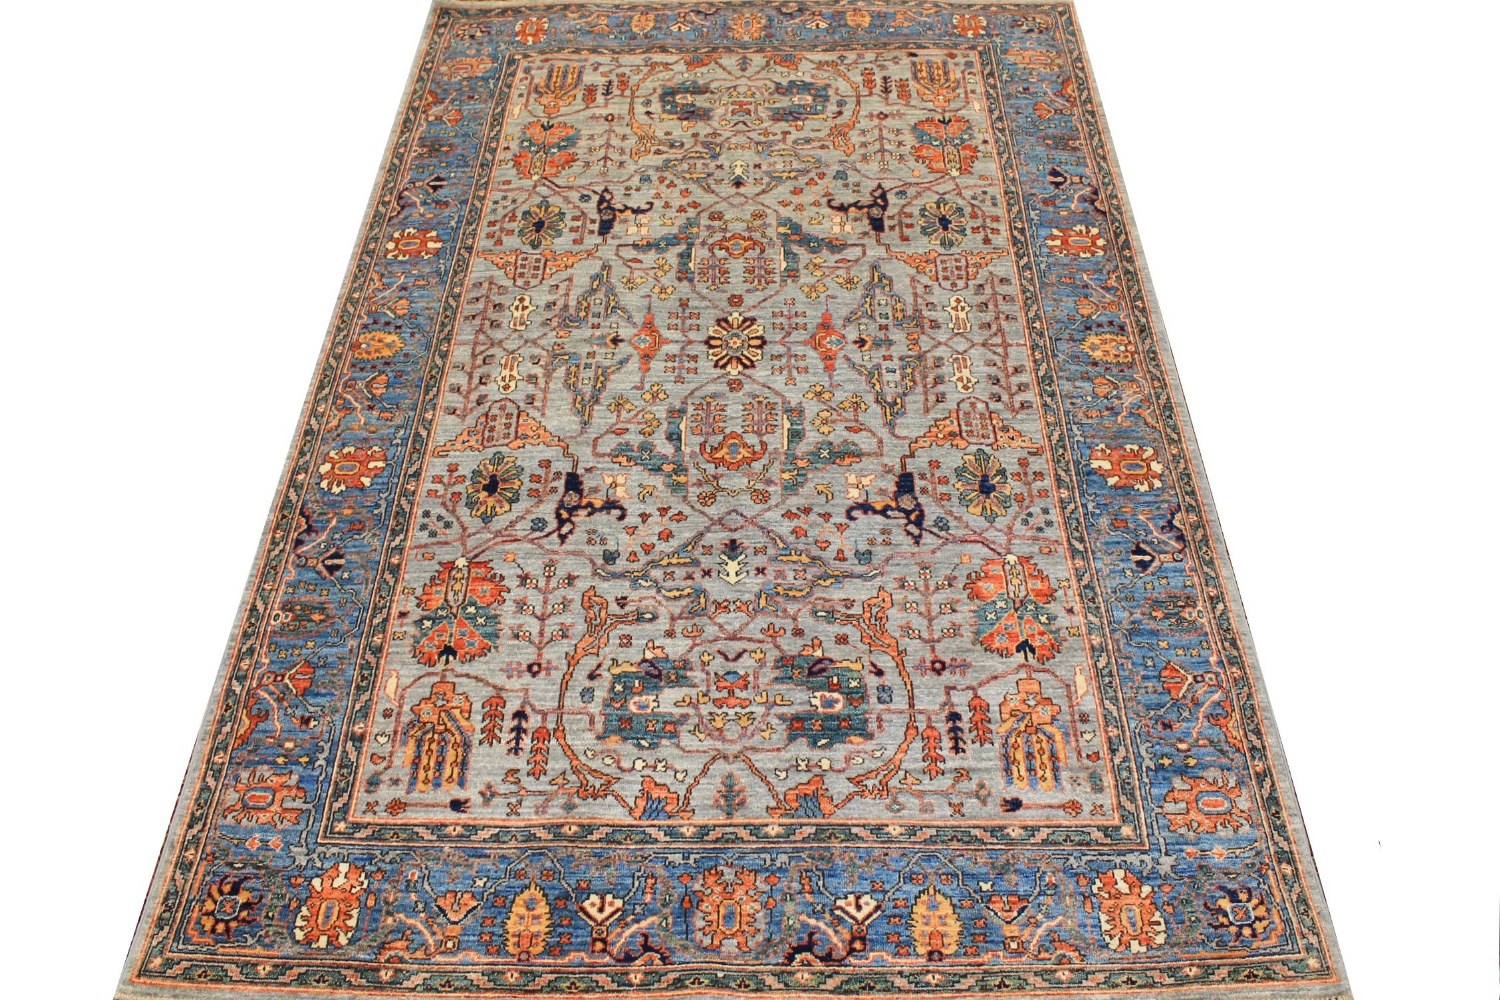 6x9 Aryana & Antique Revivals Hand Knotted  Area Rug - MR026618